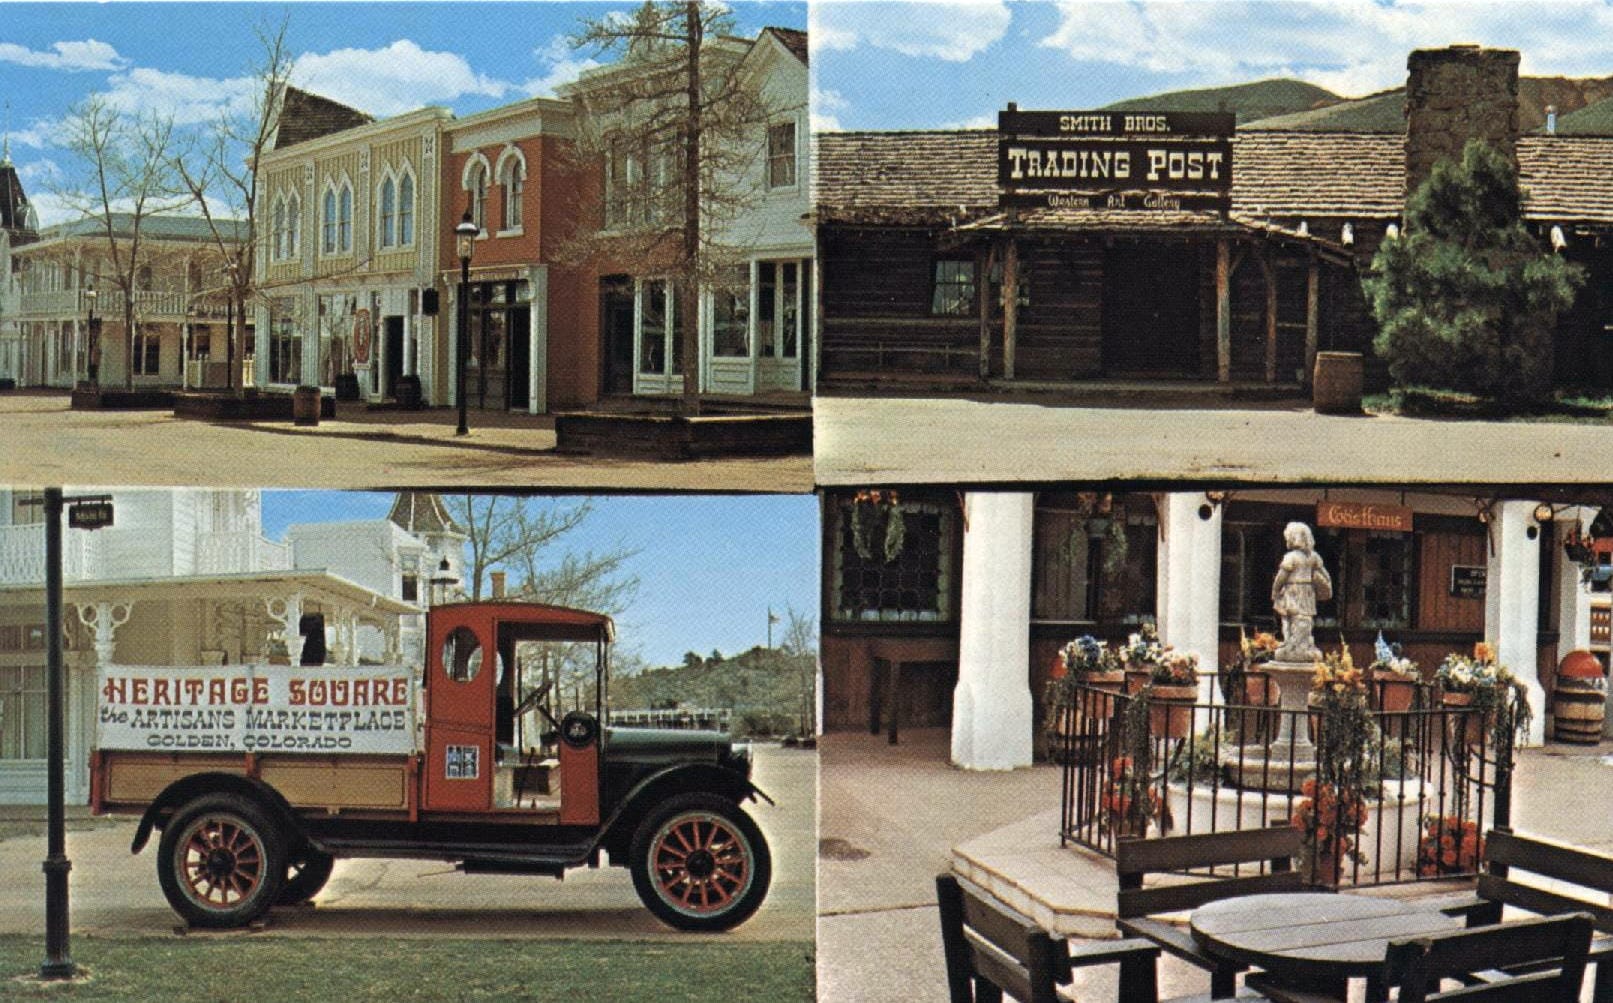 postcard showing two views of the Heritage Square building and an old pickup truck saying "Artisans Marketplace"